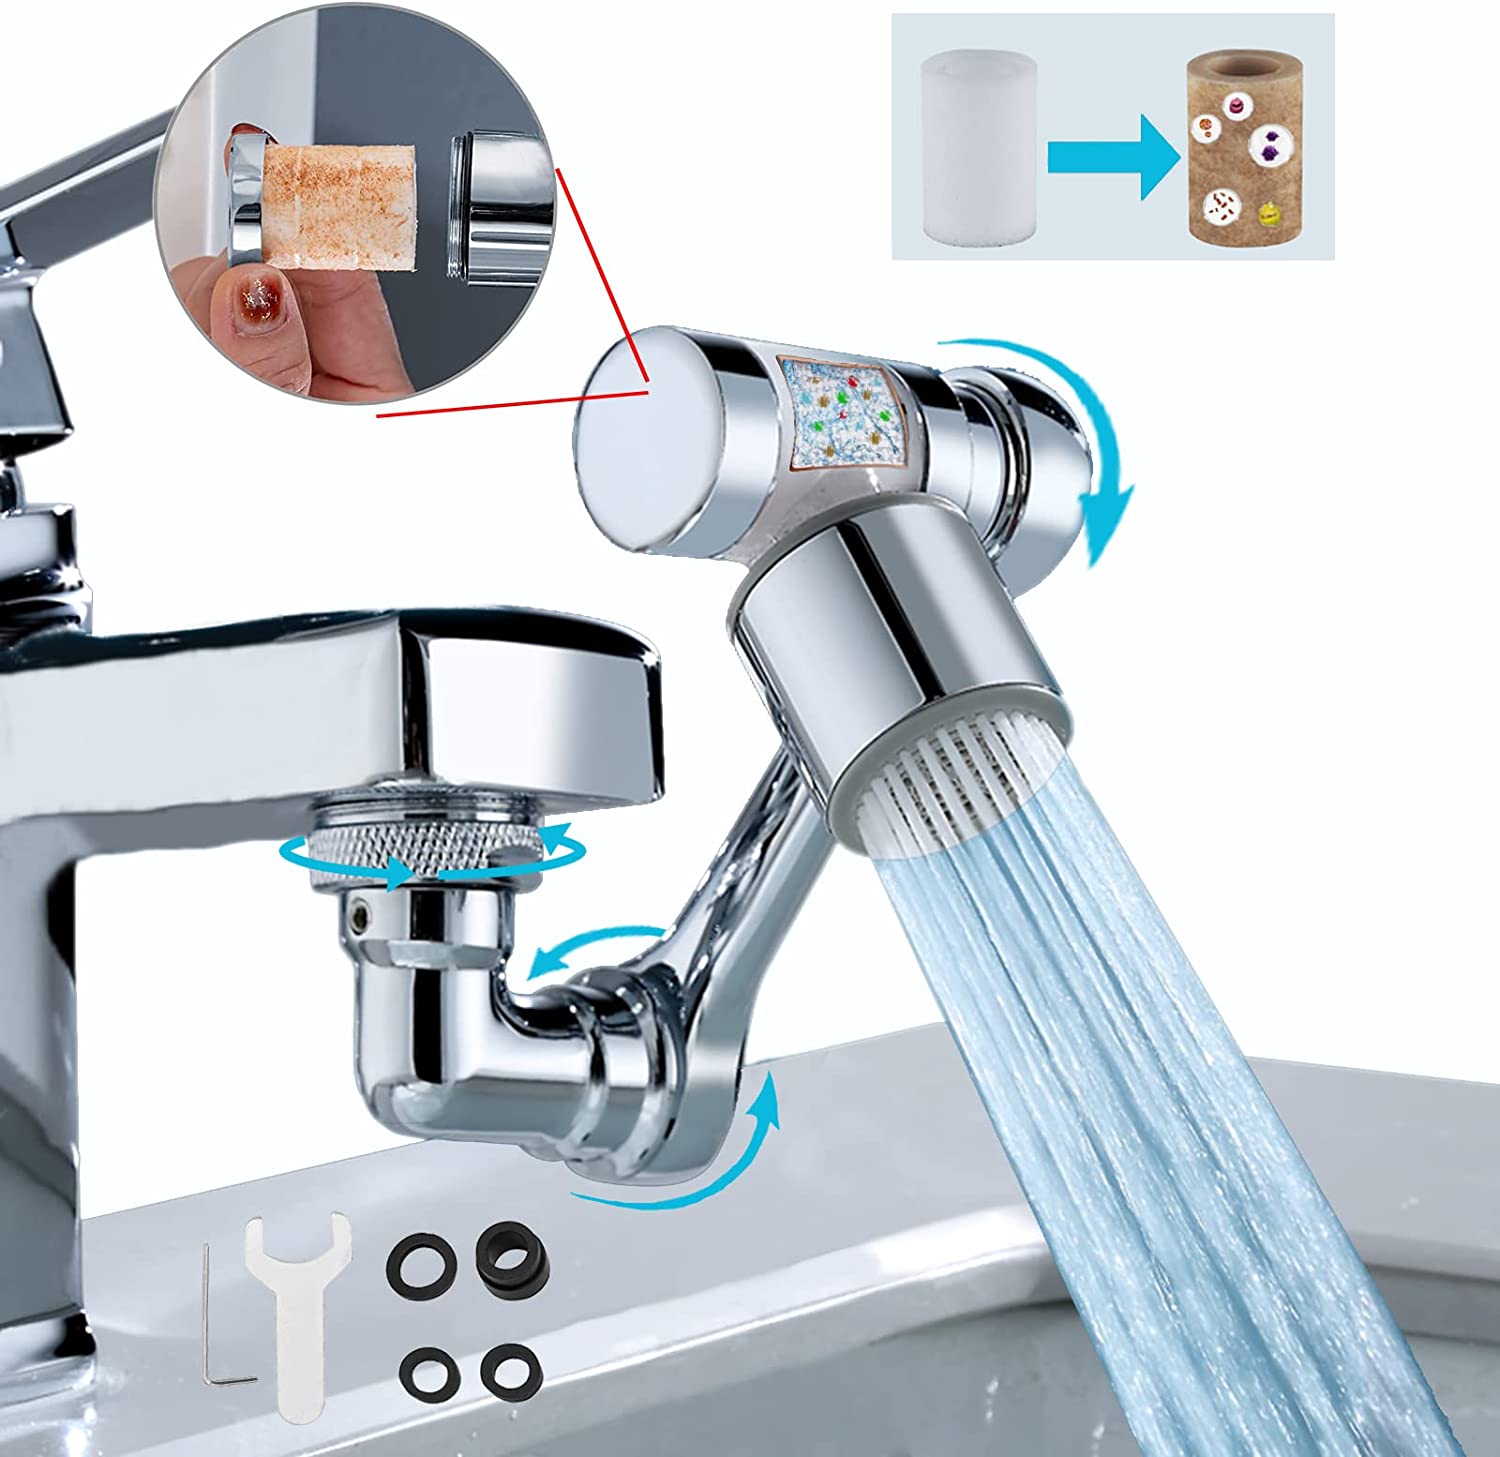 2023 New 1080° Rotating Filter Faucet Extender ,PP Cotton Filter Faucet, Universal Splash Filter Faucet, Water Filter Faucet for Kitchen Bathroom, Swivel Faucet Aerator with 2 Water Outlet Modes